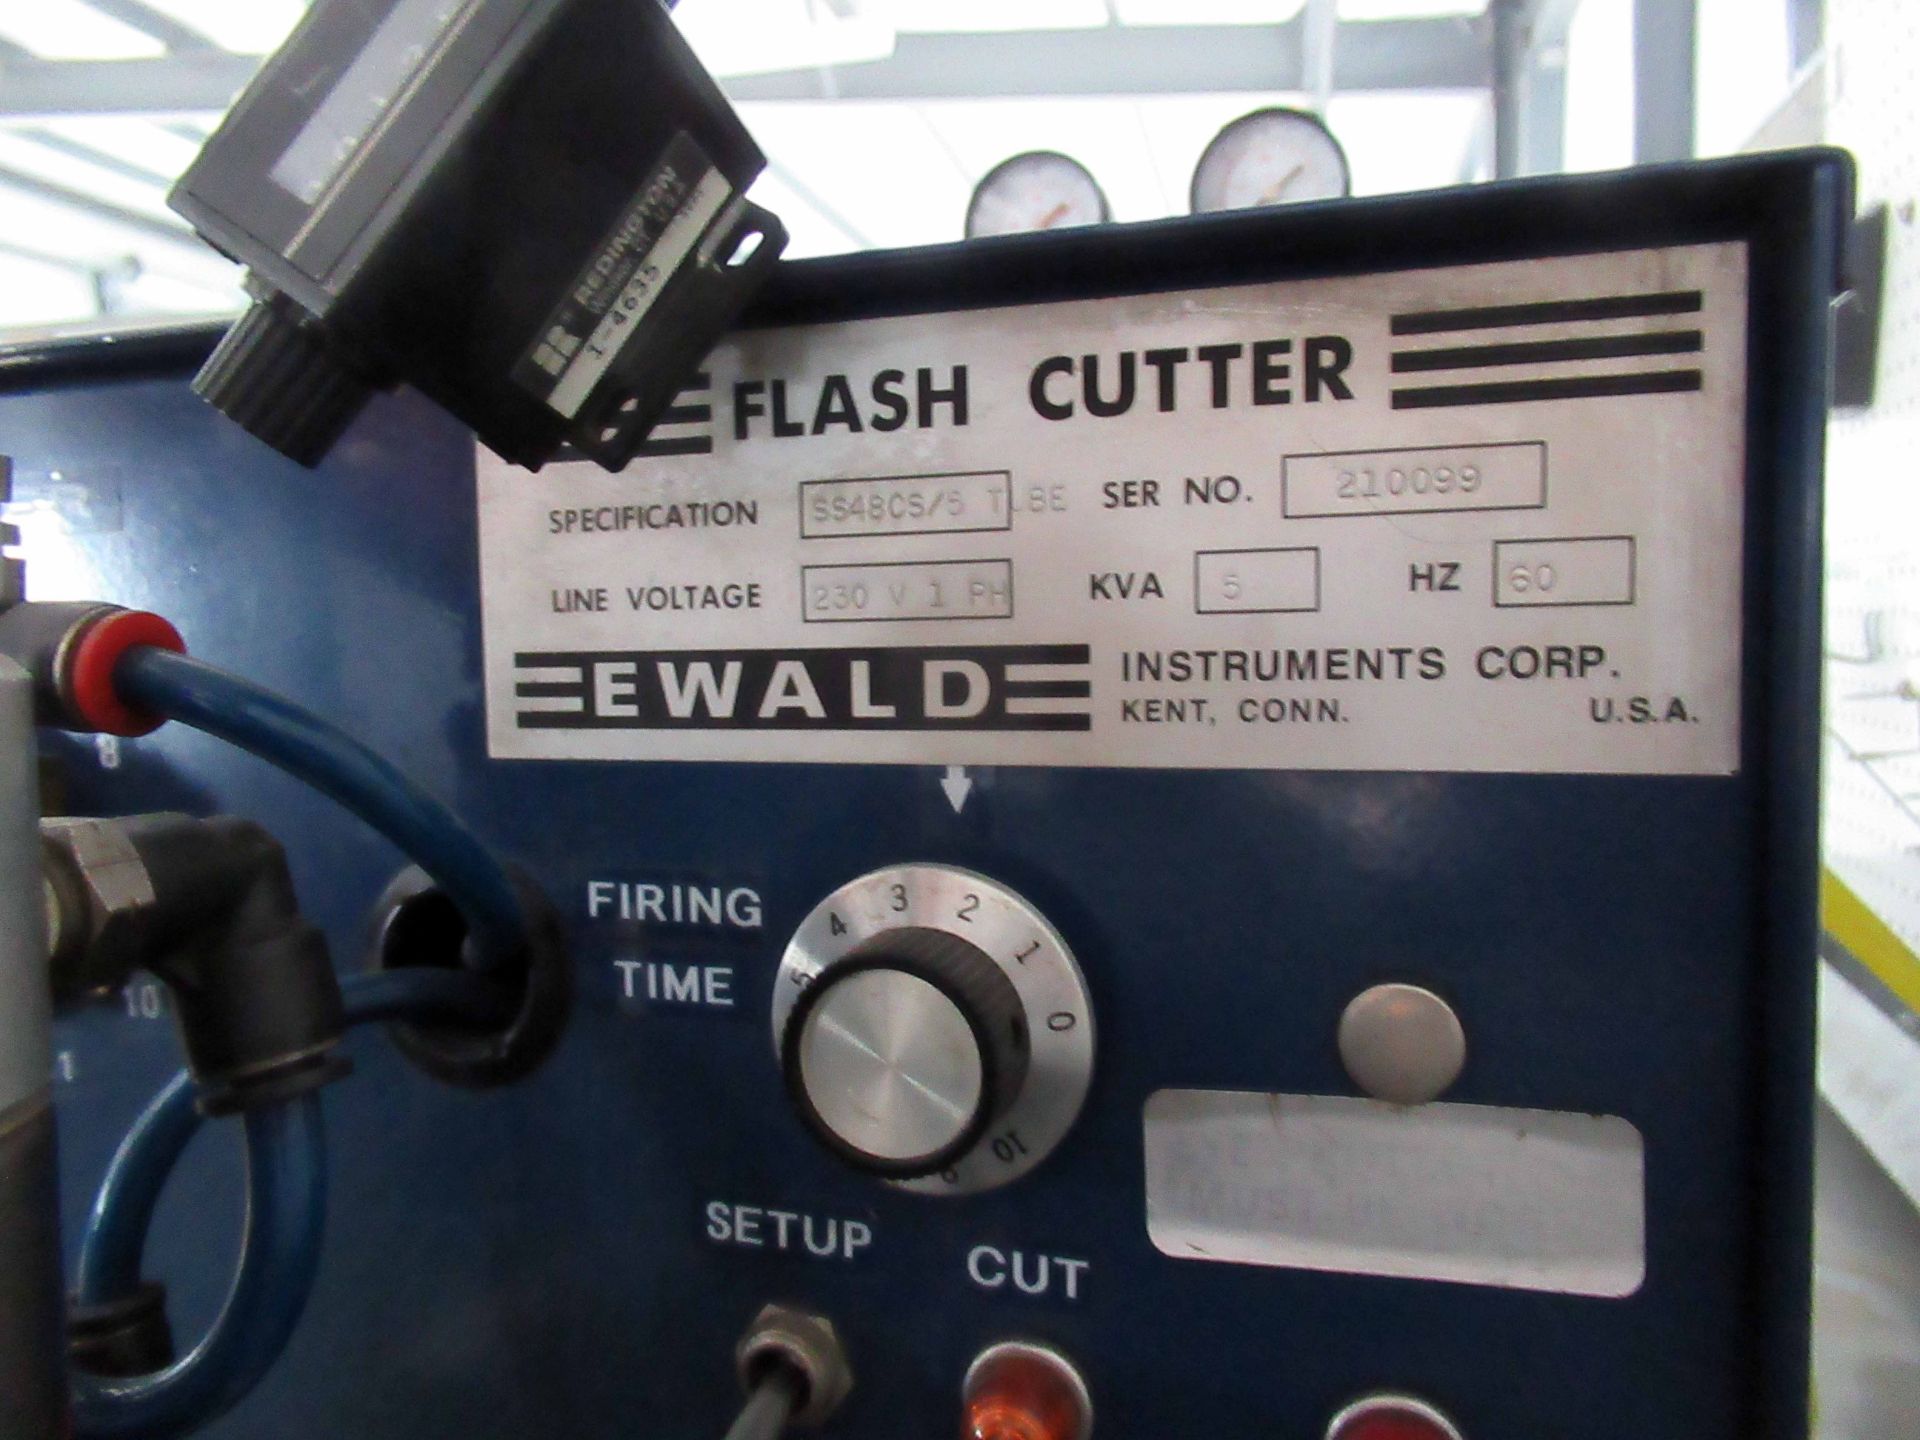 HOSE FLASH CUTTER STATION, EWALD FLASH CUTTER SS48CS/5 TUBE, Olympia 1410 wire length meter, 1 HP - Image 4 of 8